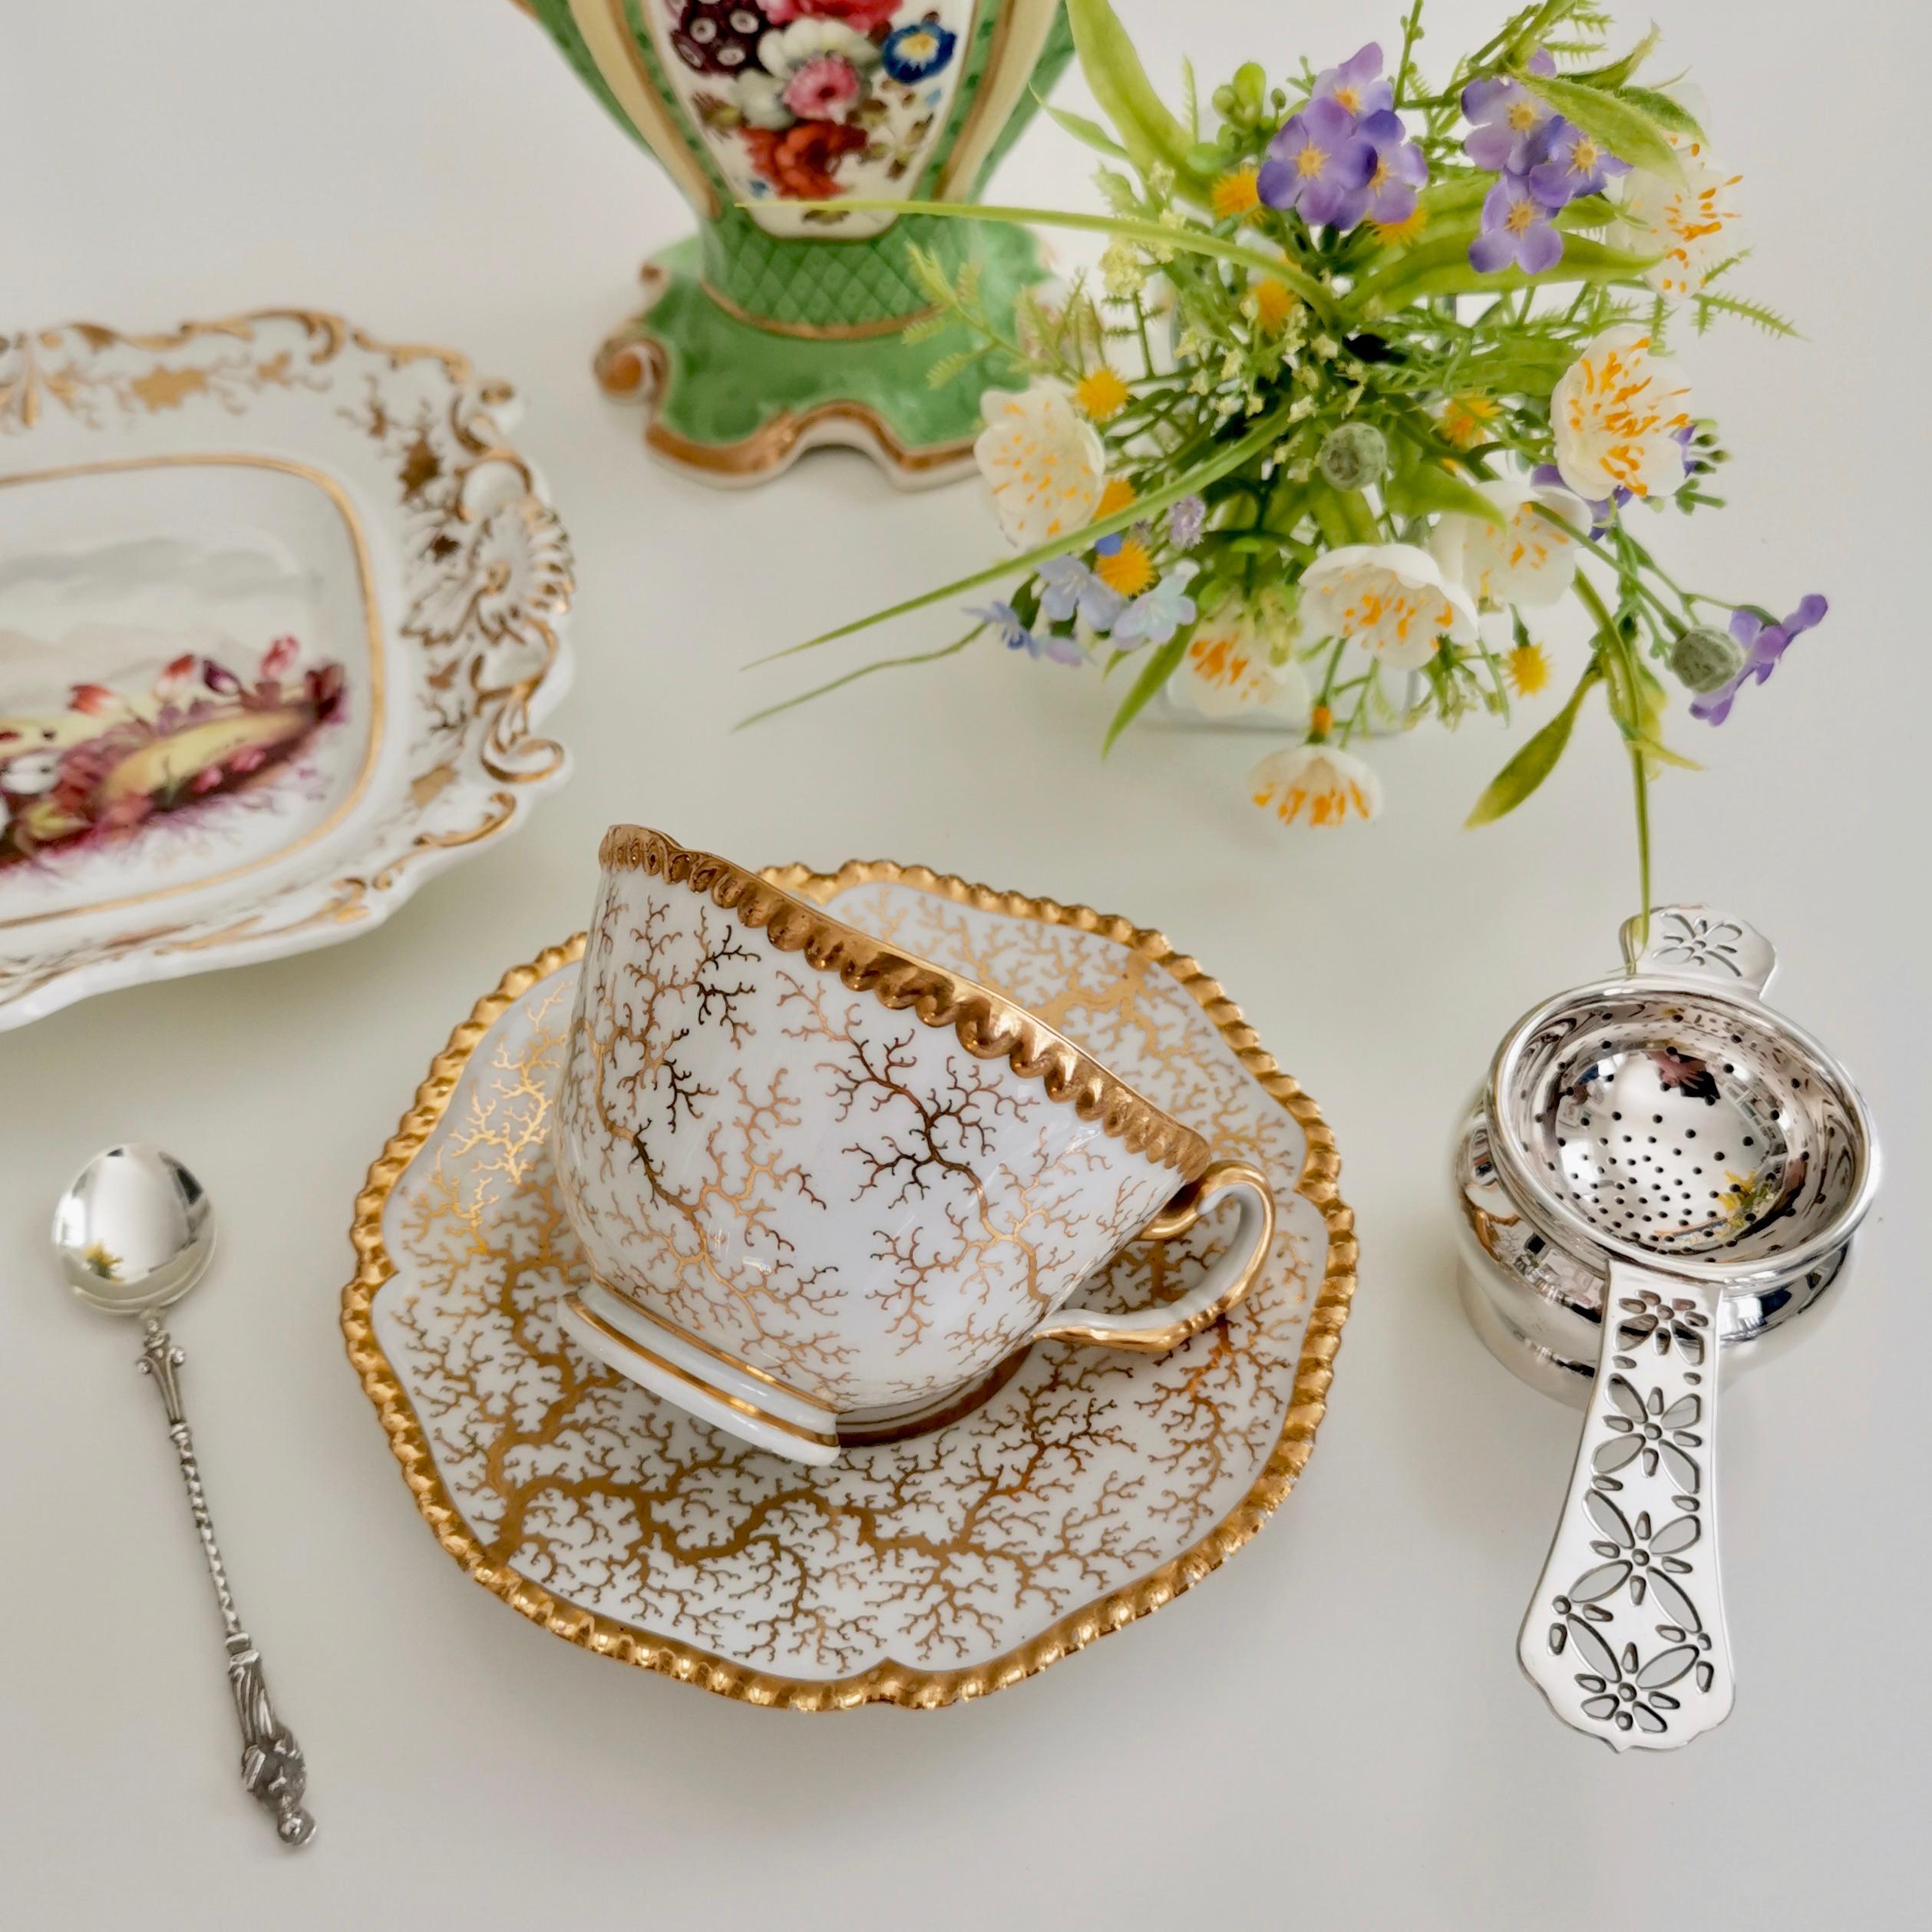 This is a beautiful teacup and saucer made by Flight, Barr & Barr between 1816 and 1820. The set is decorated with the characteristic gilt seaweed pattern.

Flight, Barr & Barr was the continuation of the famous Worcester Porcelain Company. In fact